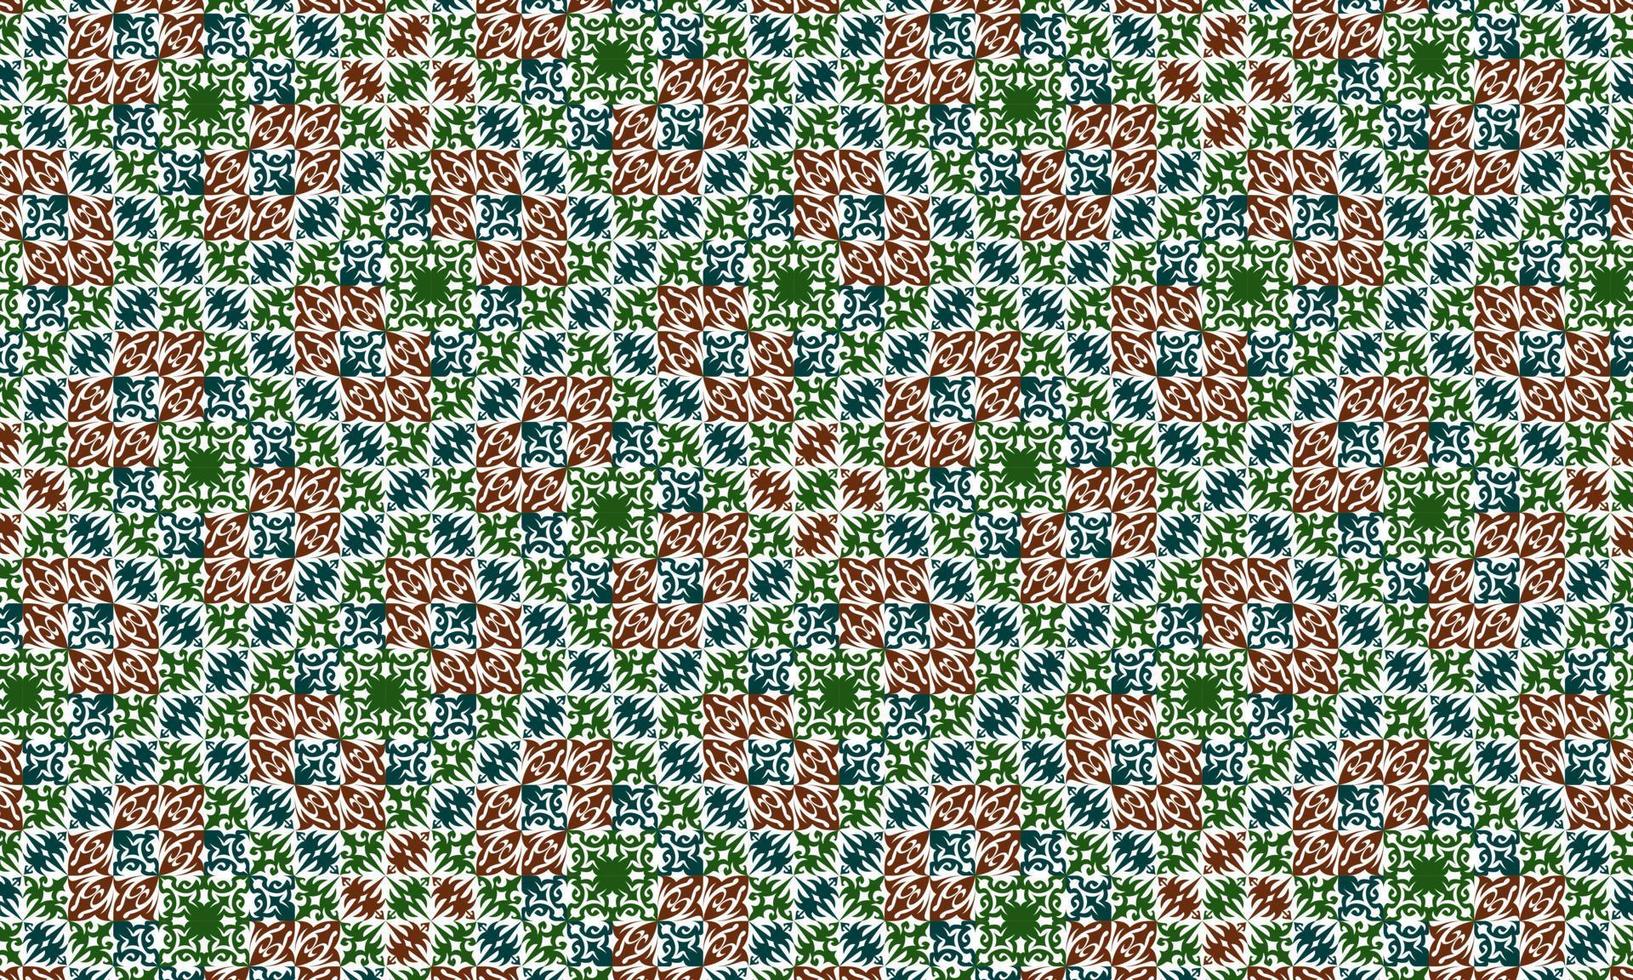 abstract unique pattern ethnic background vector